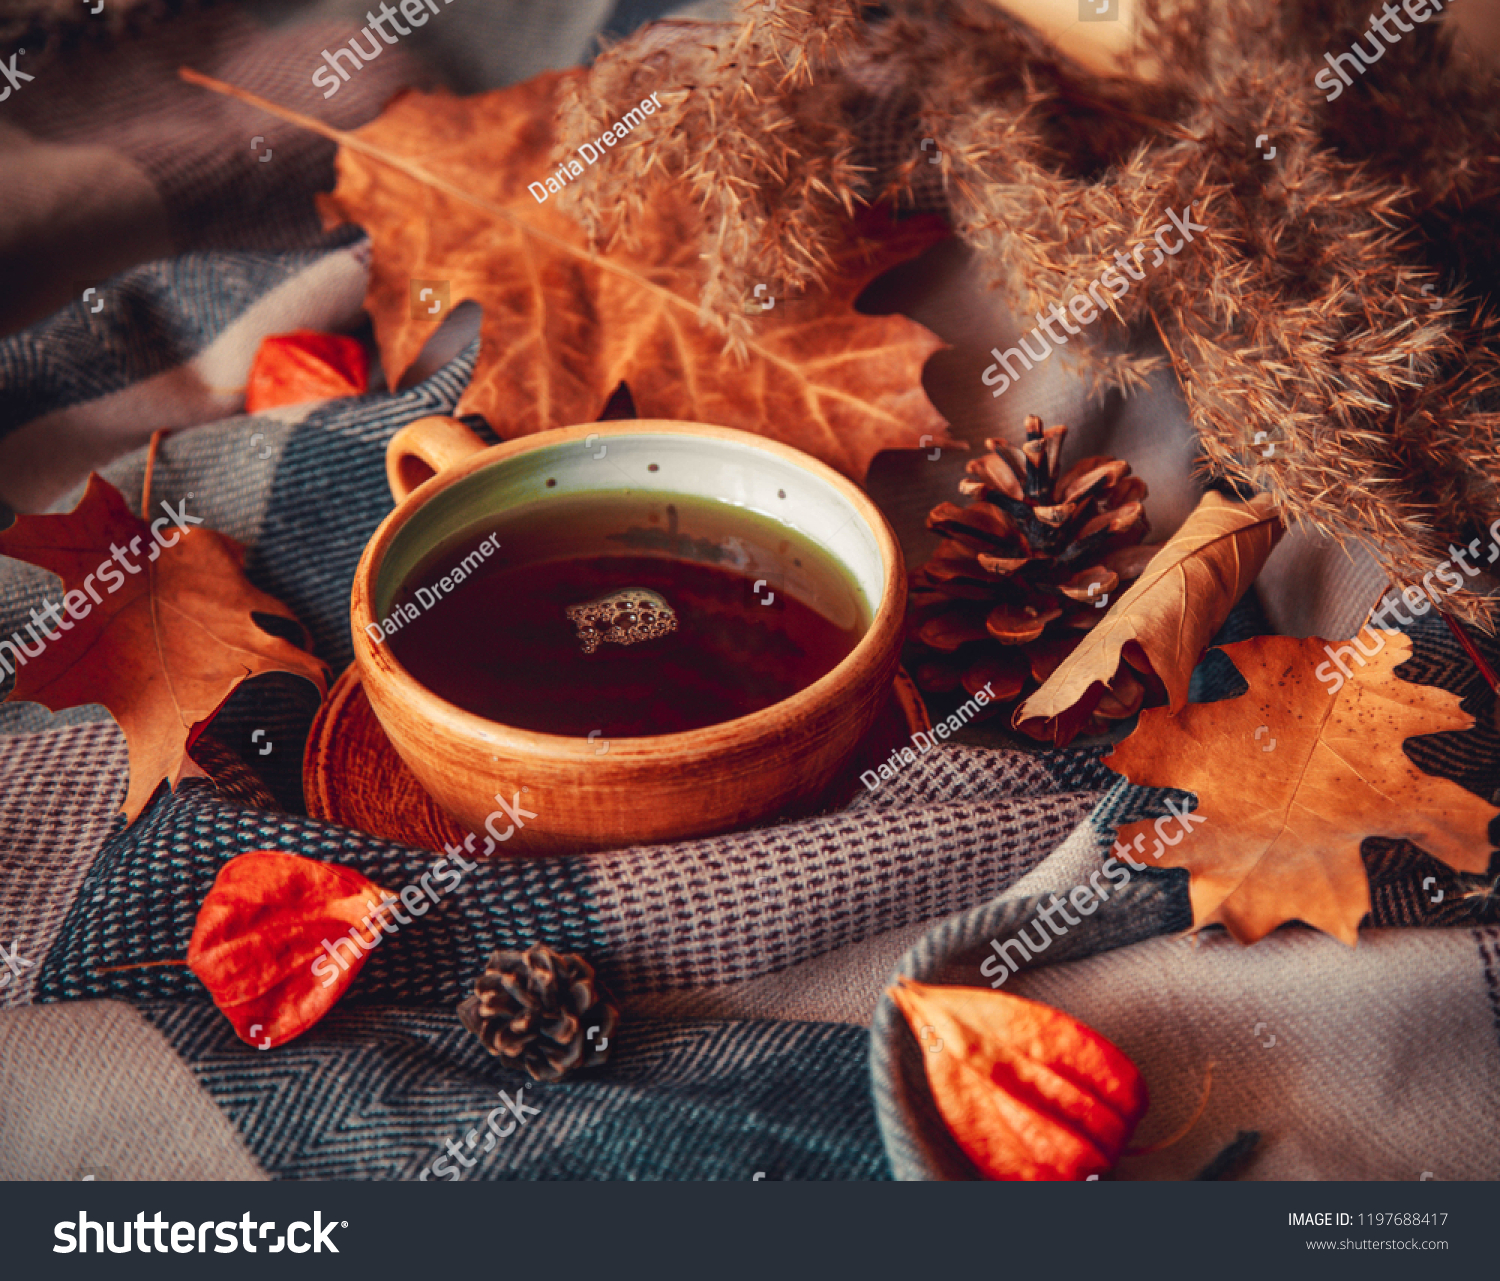 Autumn concept image with hot mug of tea, leaves, pinecones, physalis and warm scarf. Warm drink in cold weather. Home decoration.  #1197688417